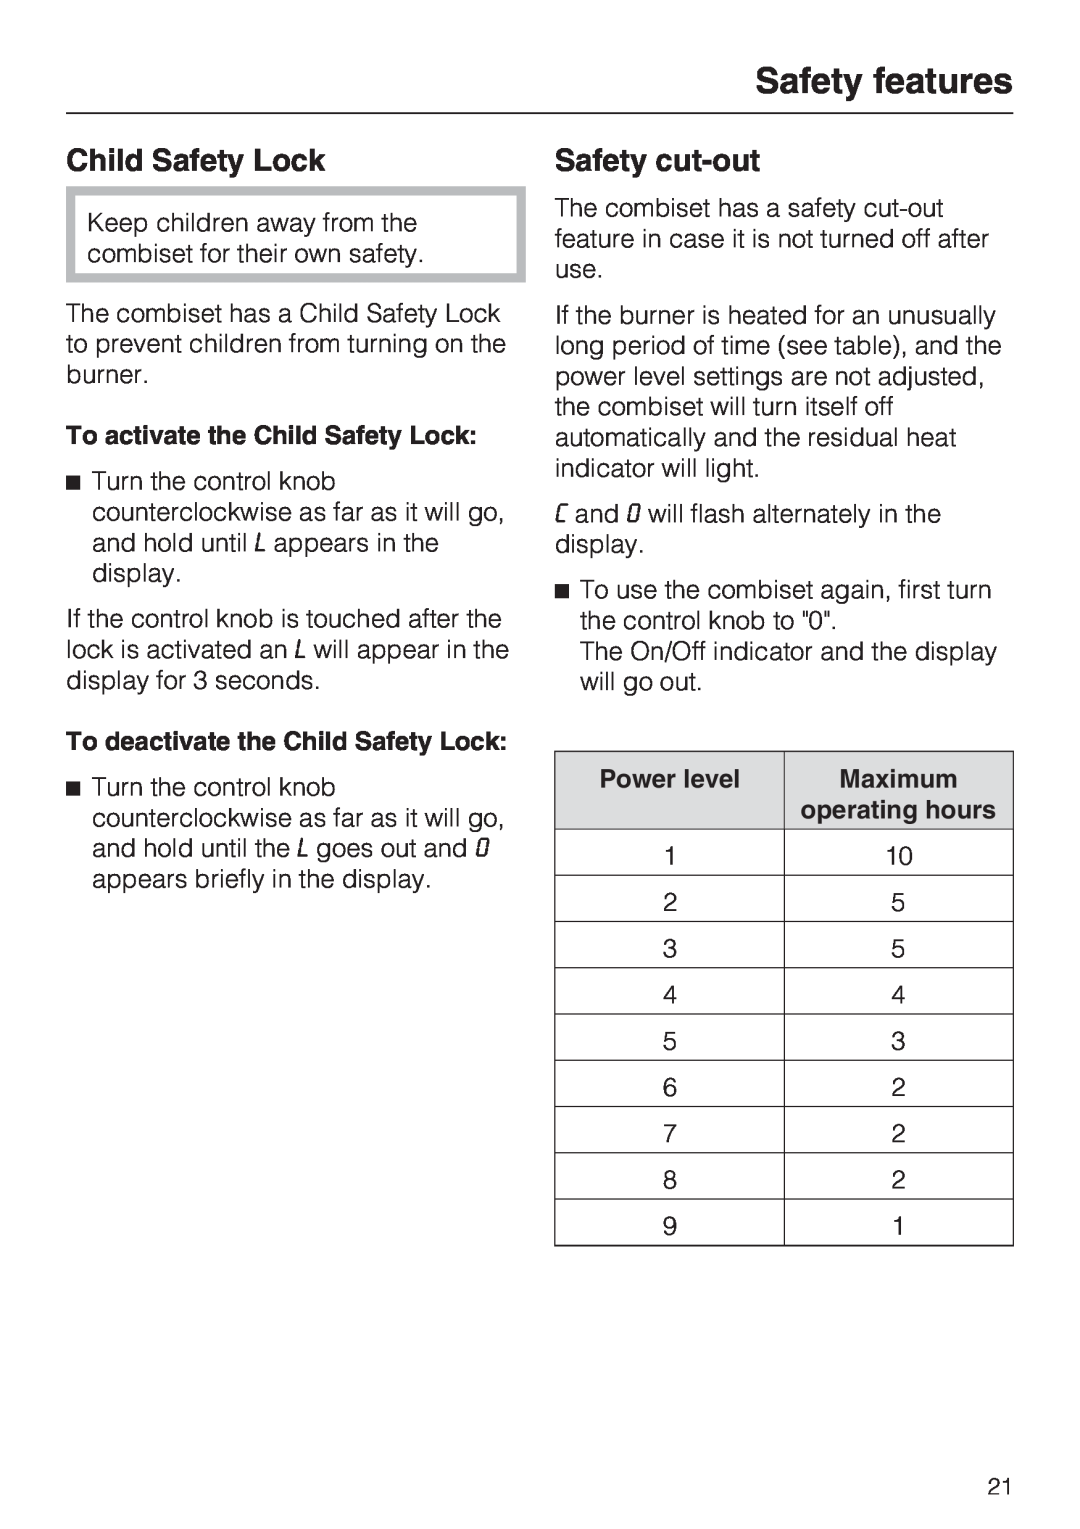 Miele CS 1221 installation instructions Safety features, Child Safety Lock, Safety cut-out 